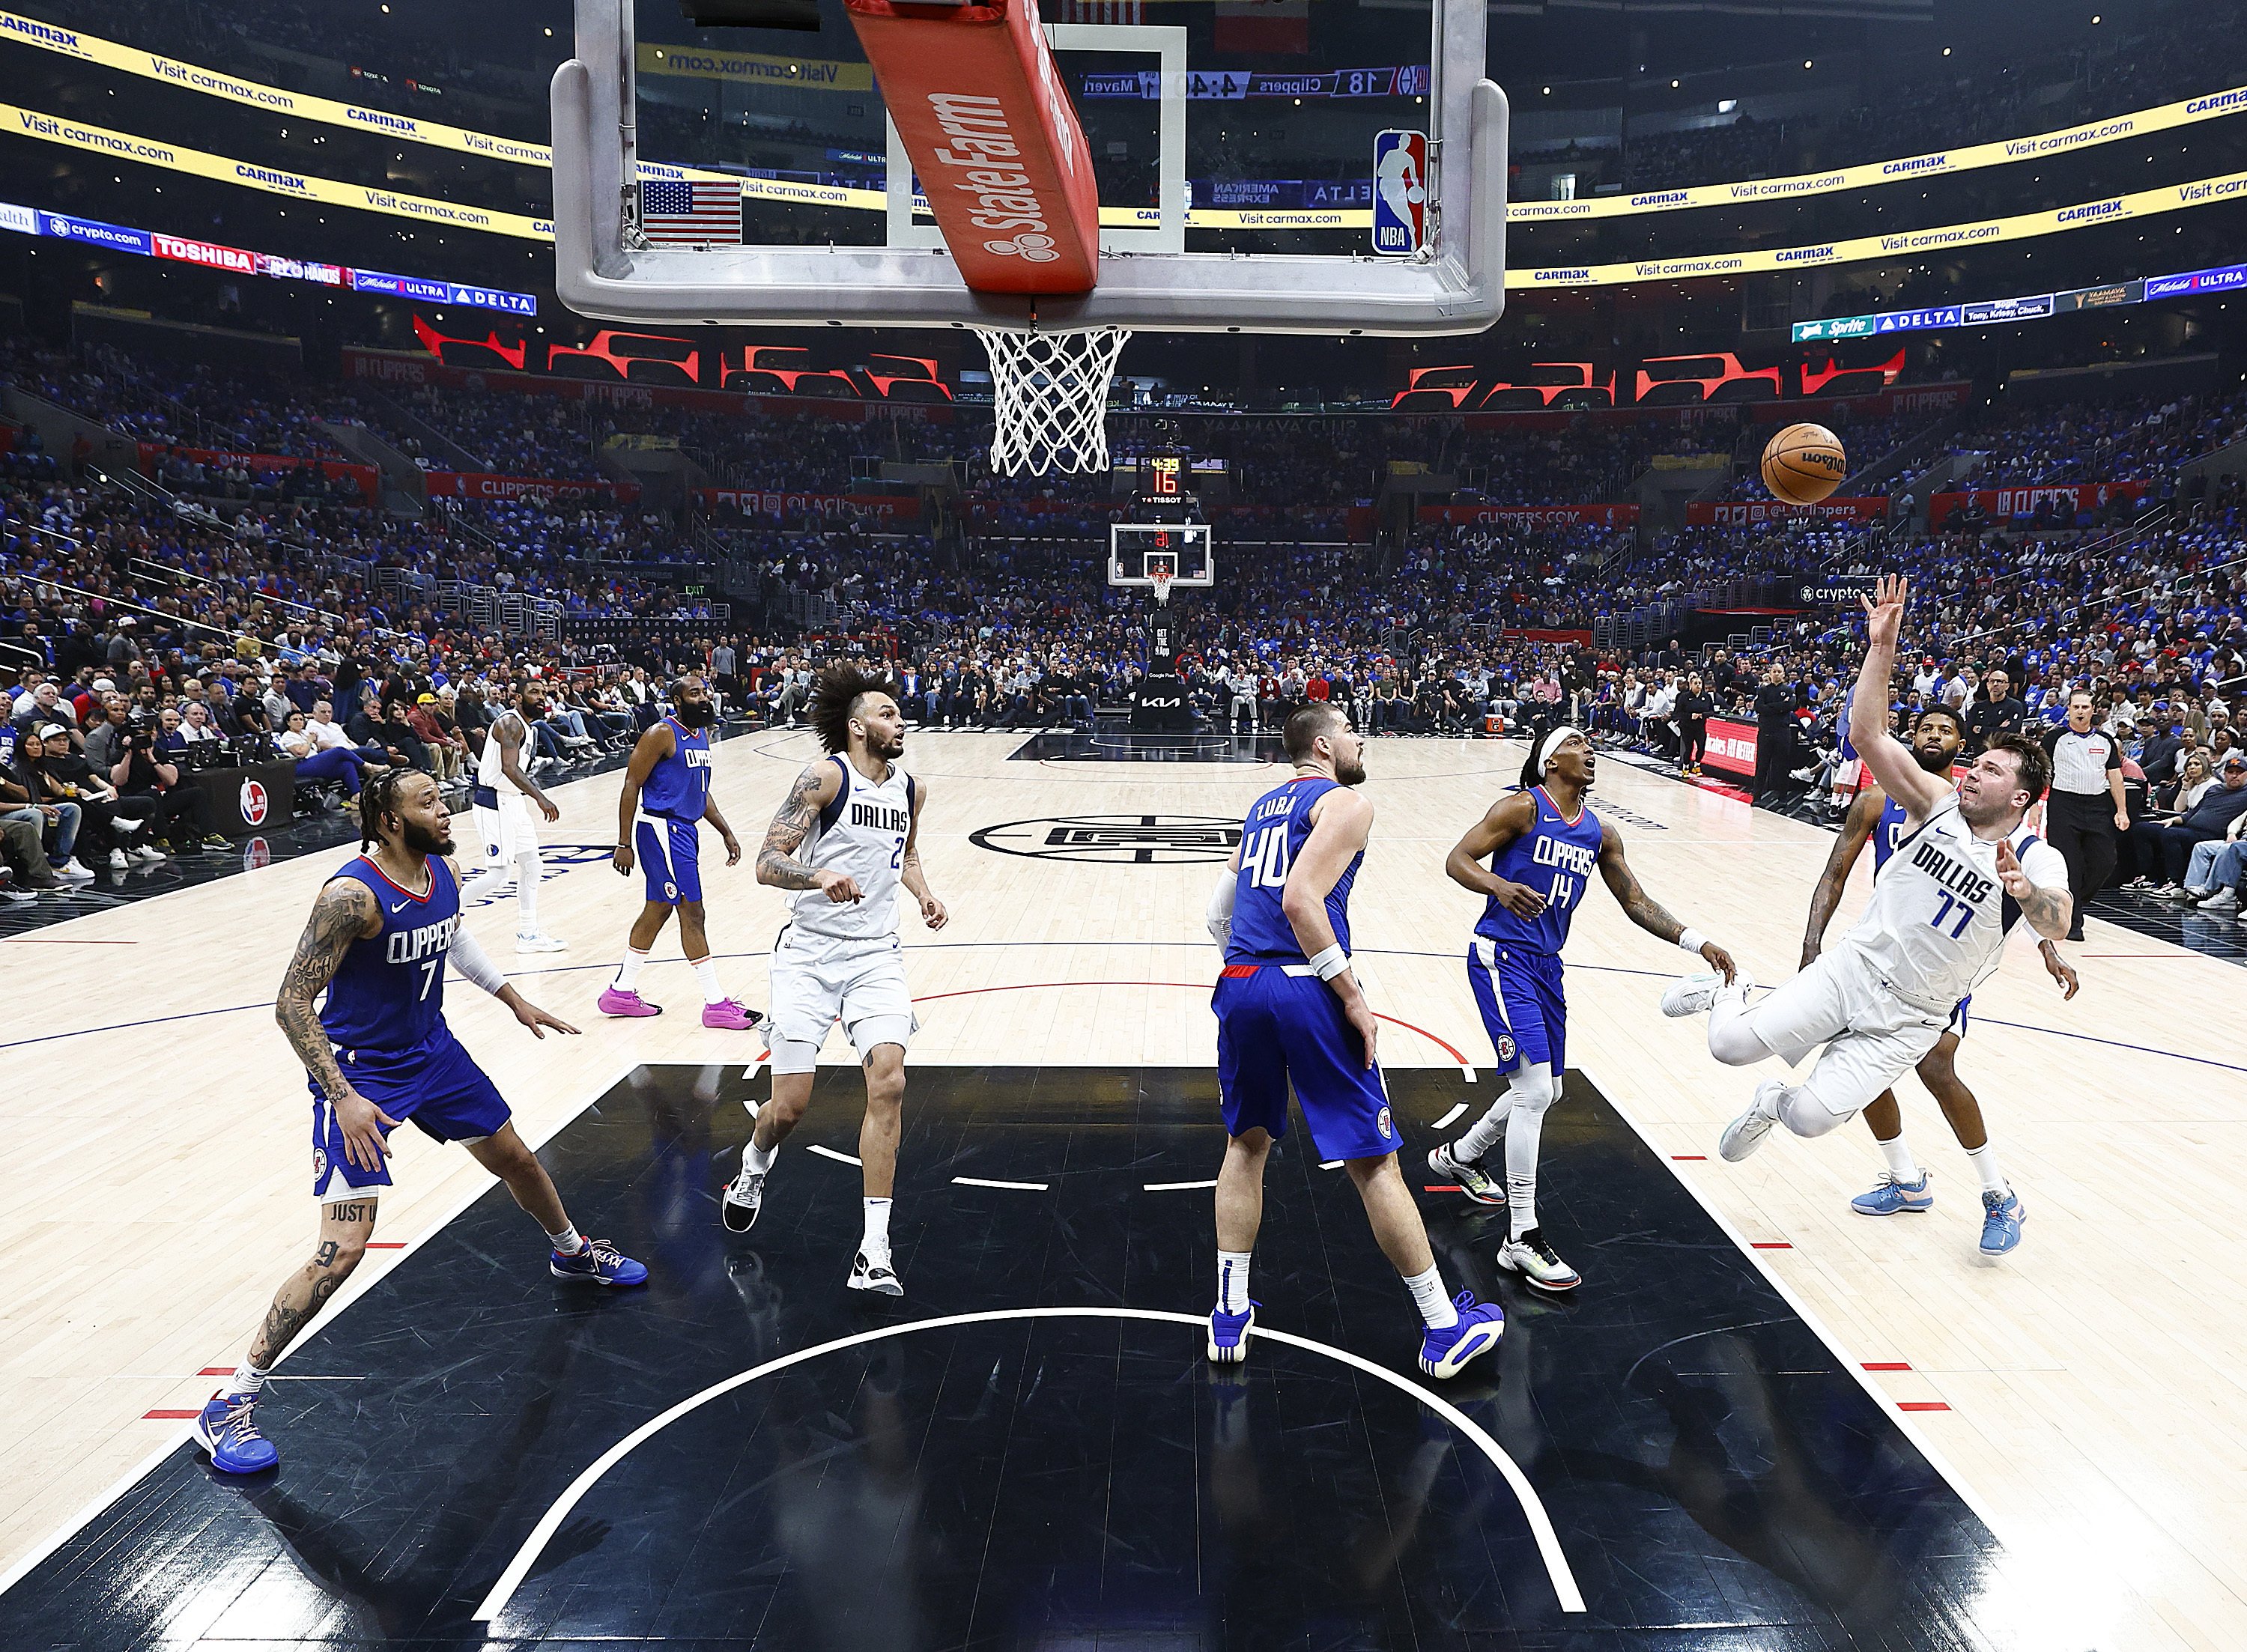 Luka Doncic of the Dallas Mavericks takes a shot against the LA Clippers